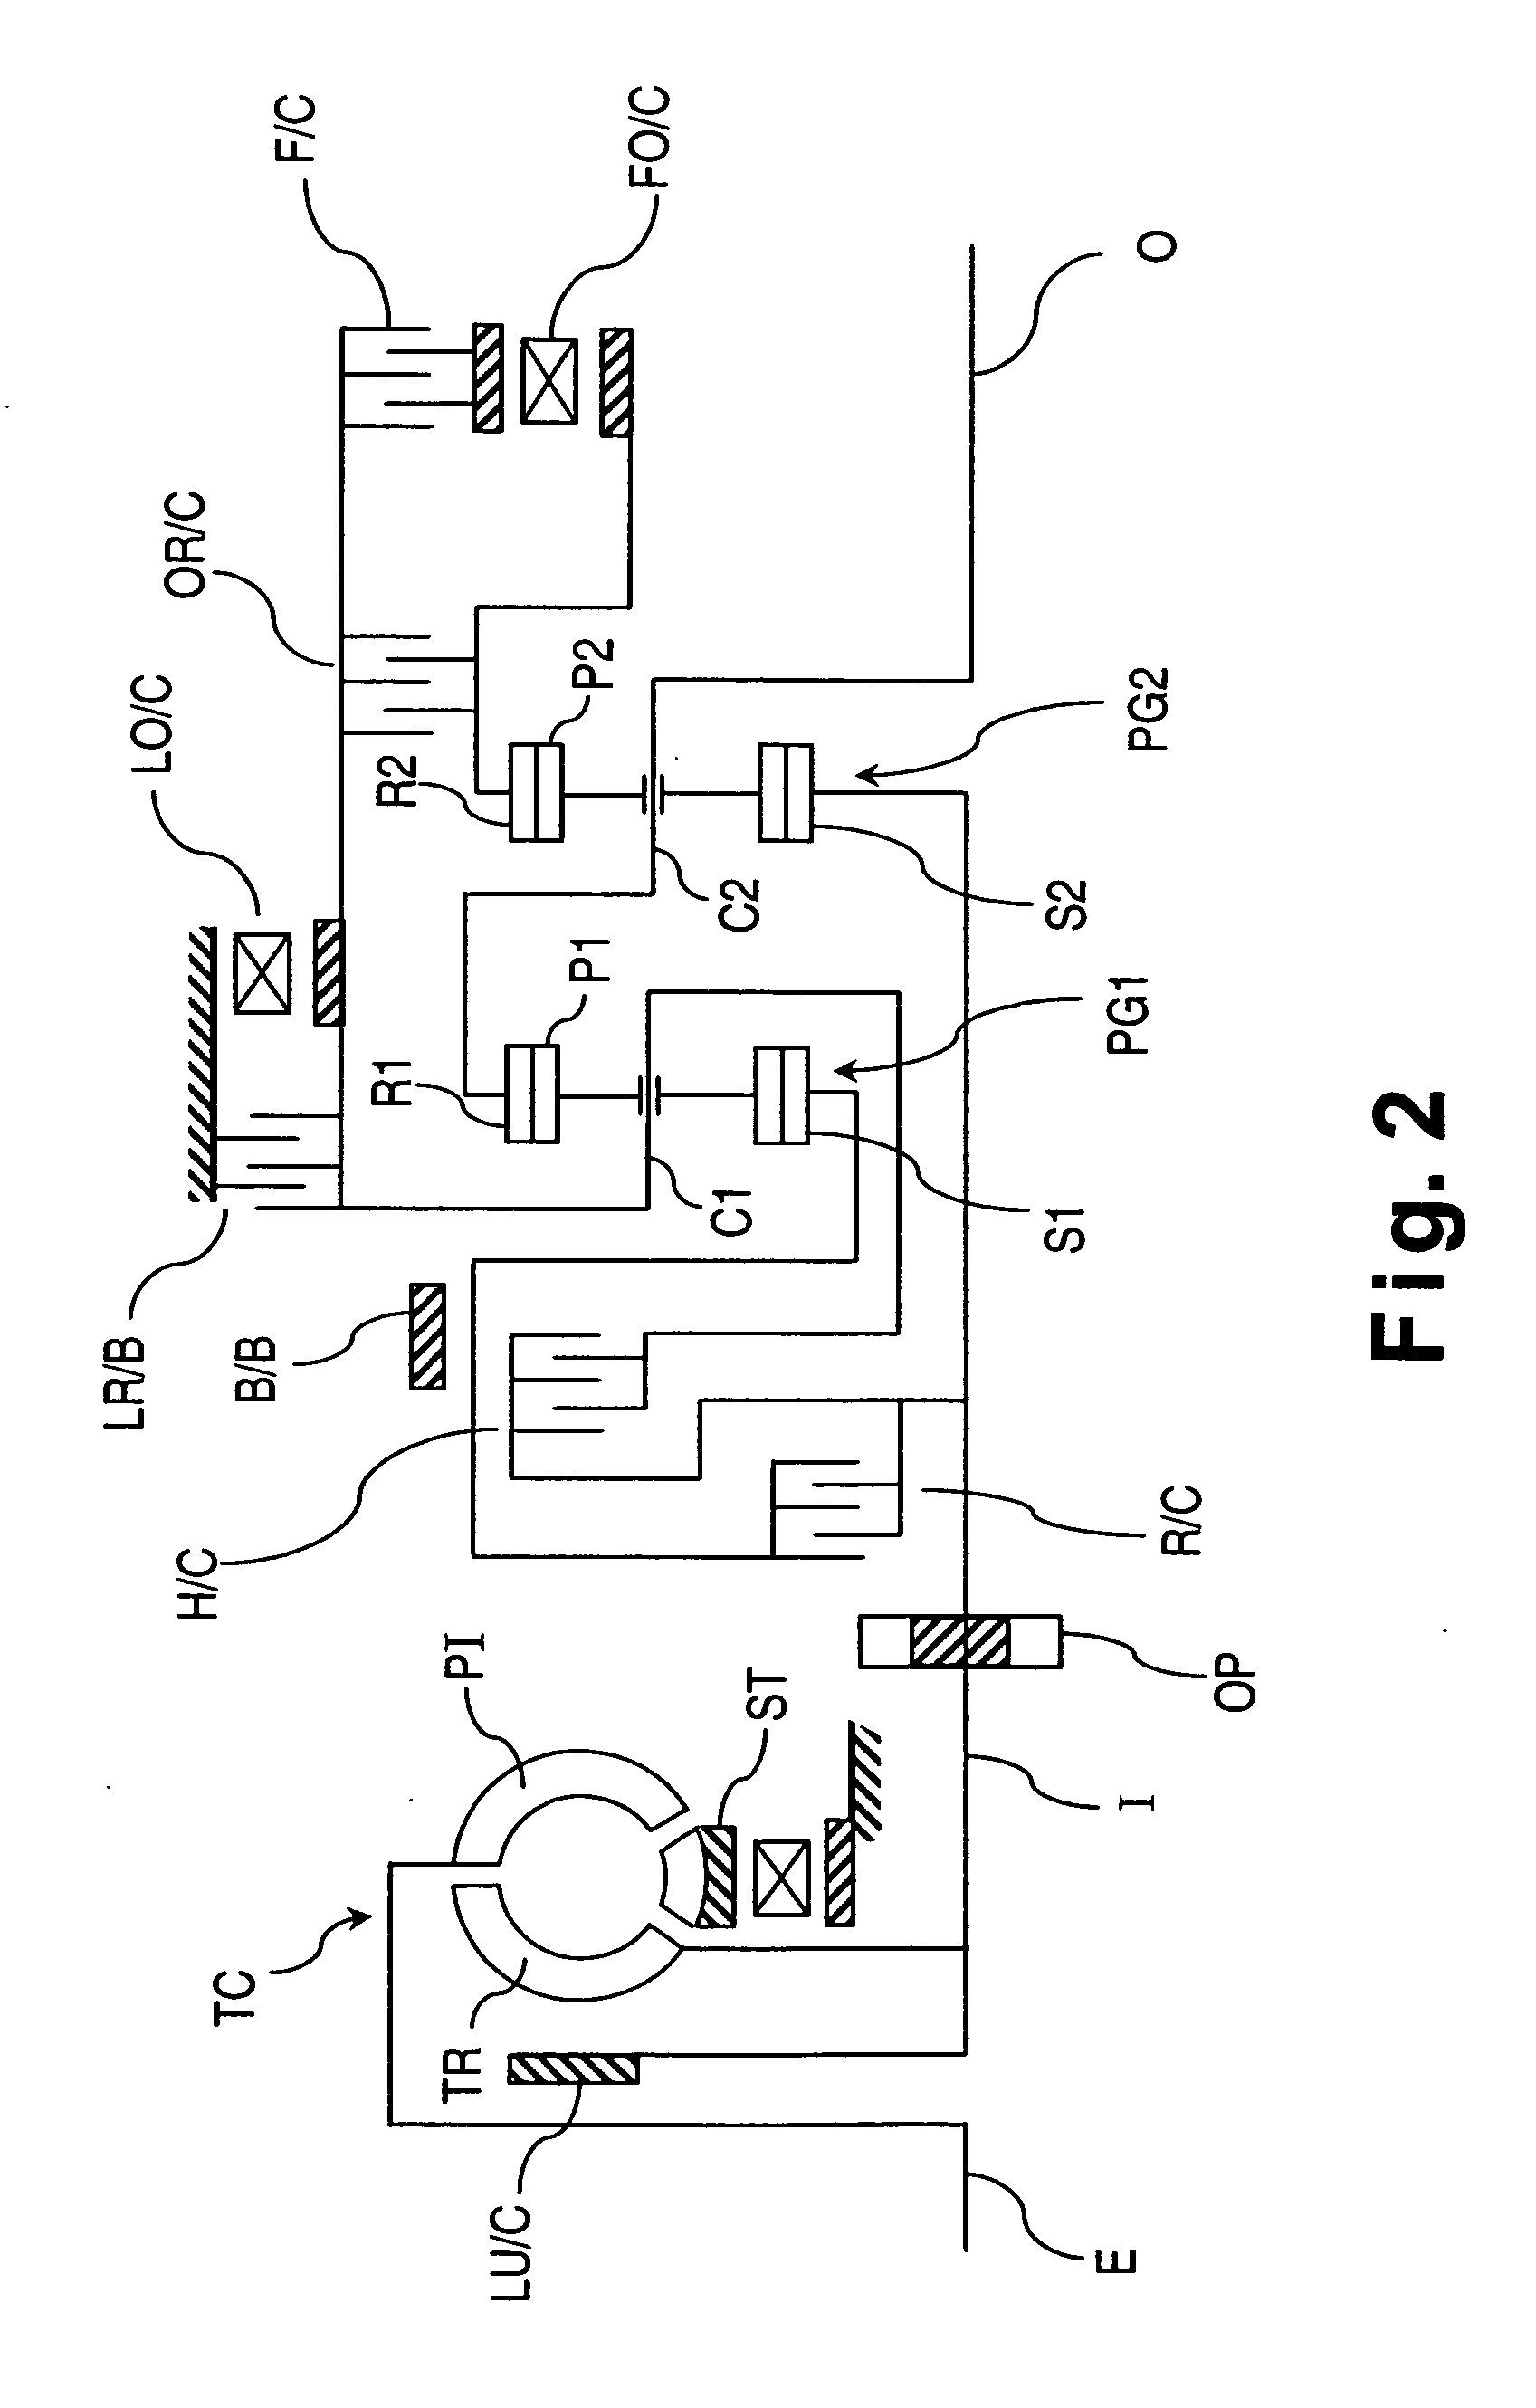 Engine idle speed control device